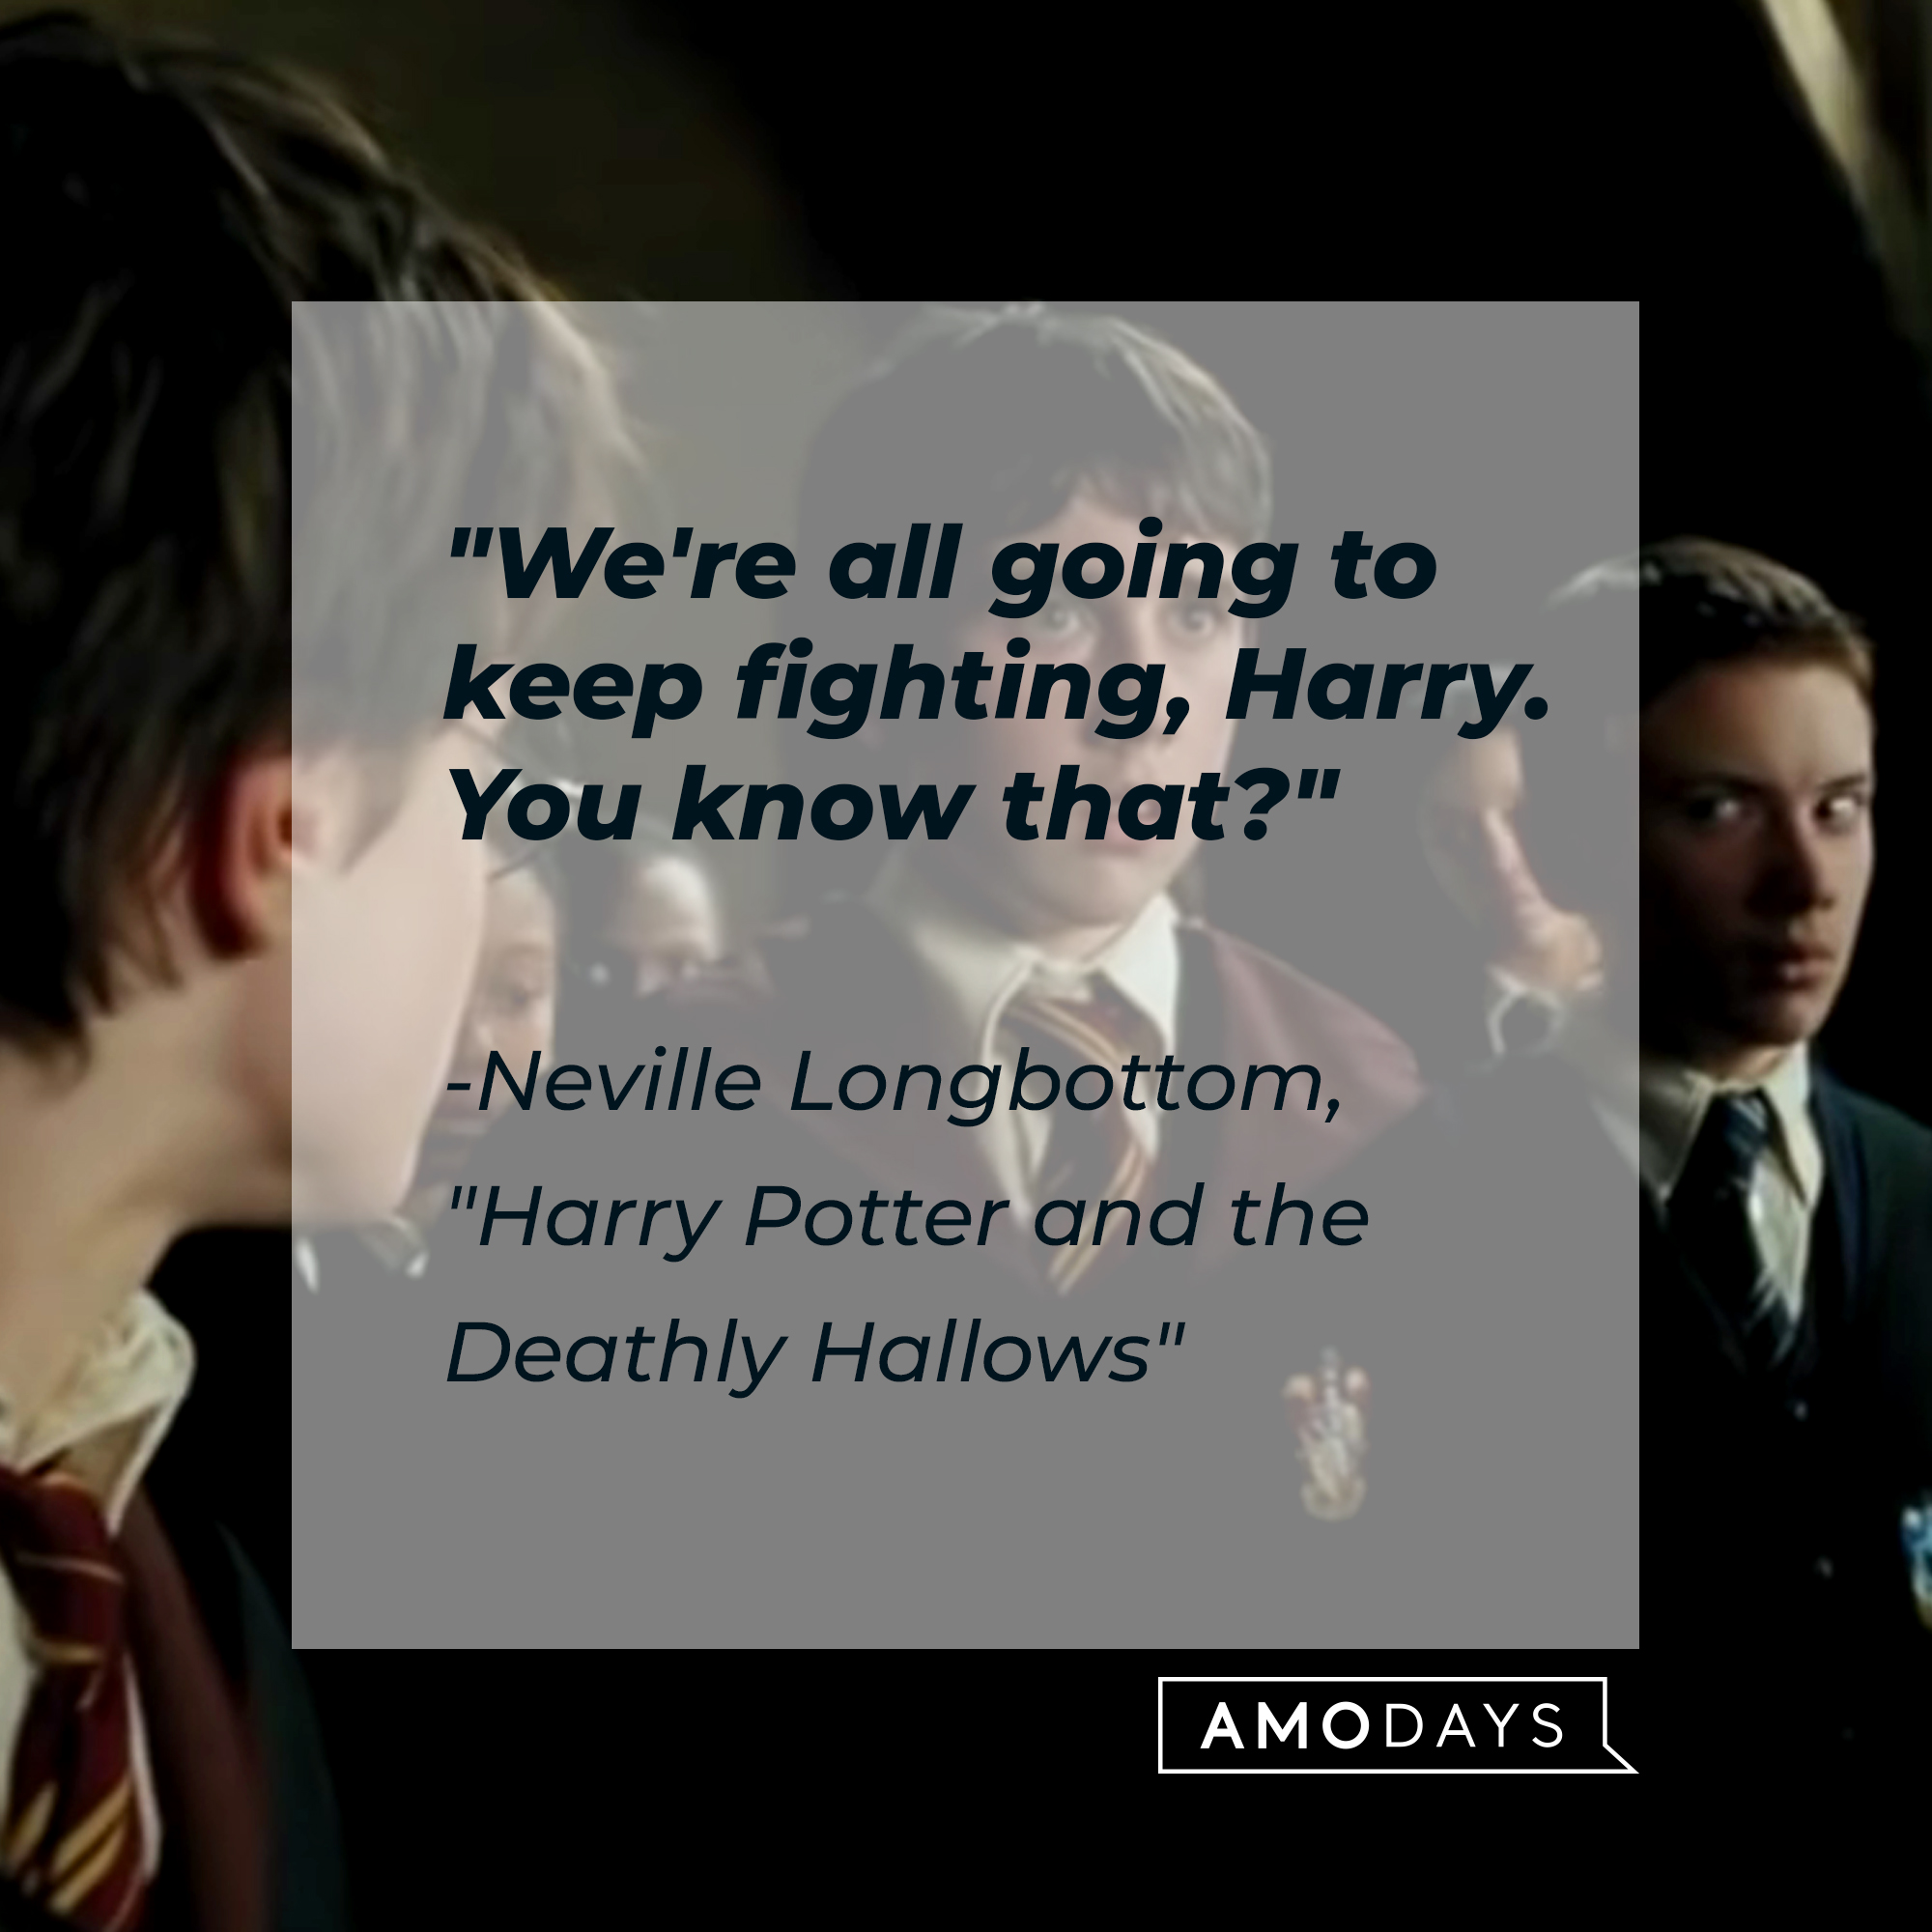 Neville Longbottom with his quote: "We're all going to keep fighting, Harry. You know that?" | Source: Facebook.com/harrypotter